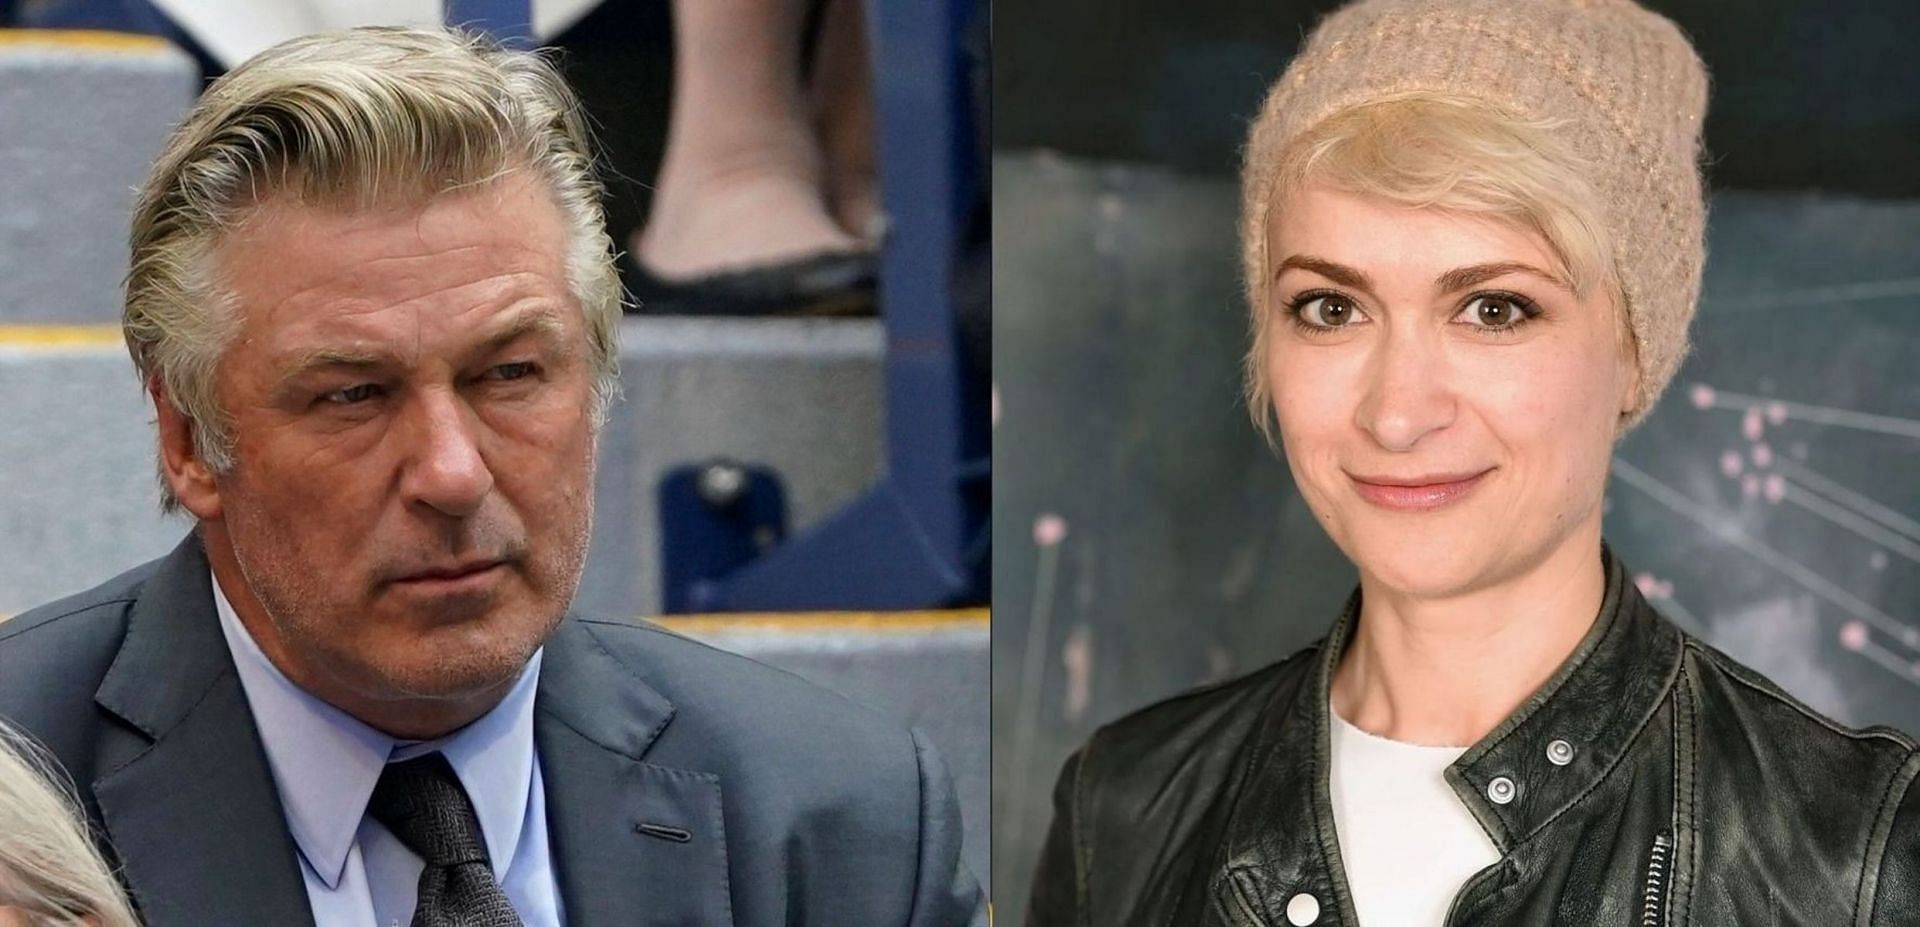 Alec Baldwin and Halyna Hutchins (Image viaJohn Minchillo/AP, and Fred Hayes /Getty Images)